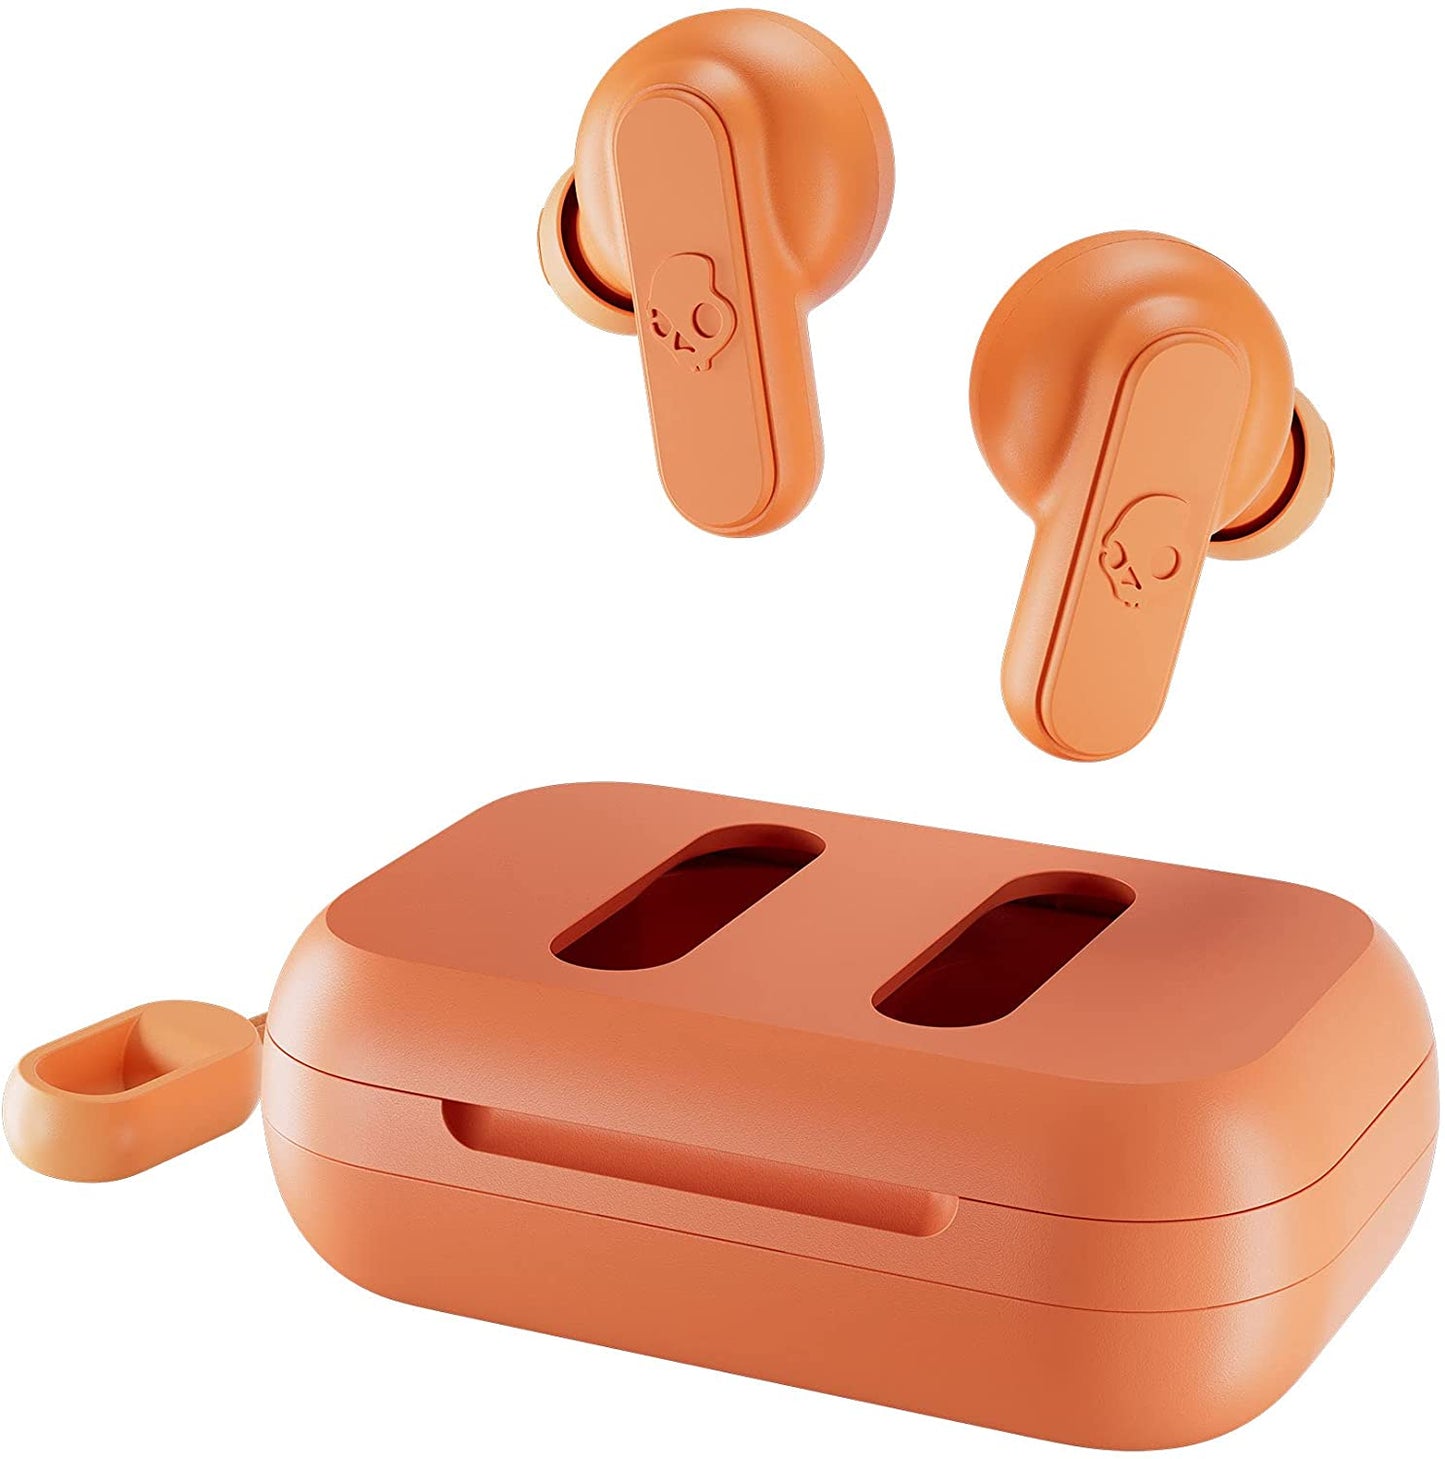 Skullcandy Dime True Wireless Earbuds Bluetooth 5.0 Earphones with IPX4 Water/Sweat Resistance, 2 Mics, 3.5-Hour Playtime (6 Colors Available)